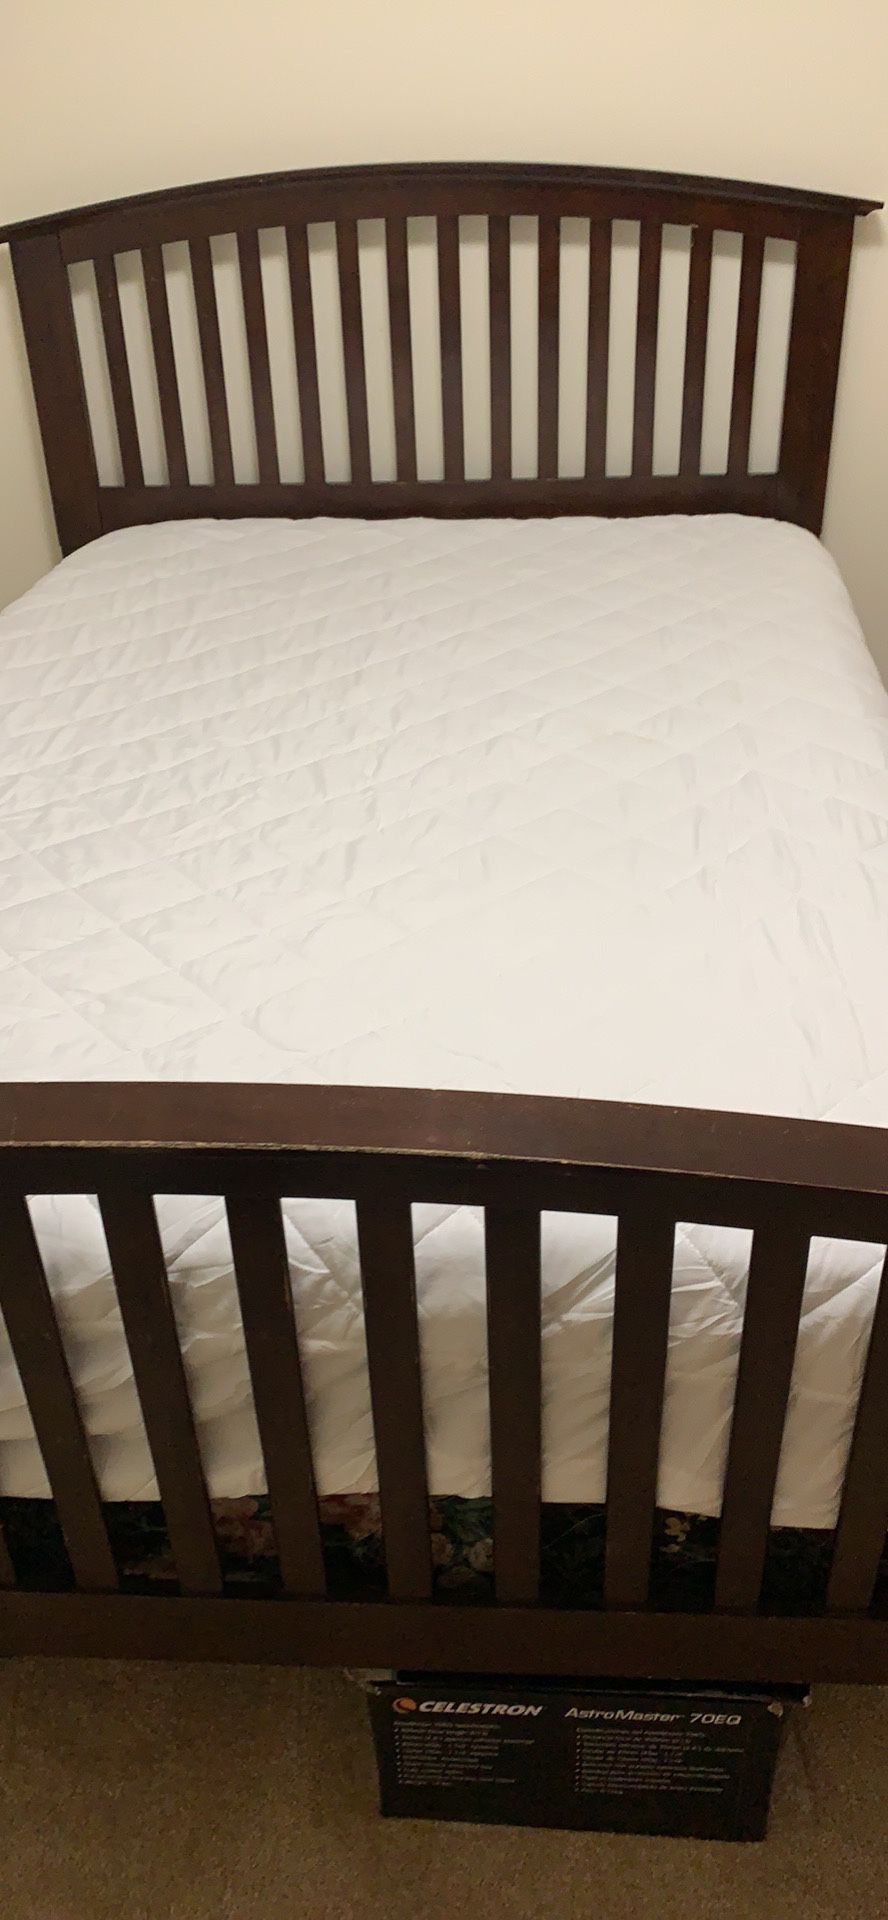 Full size bed with mattress, box spring, bed frame, and new mattress protectors